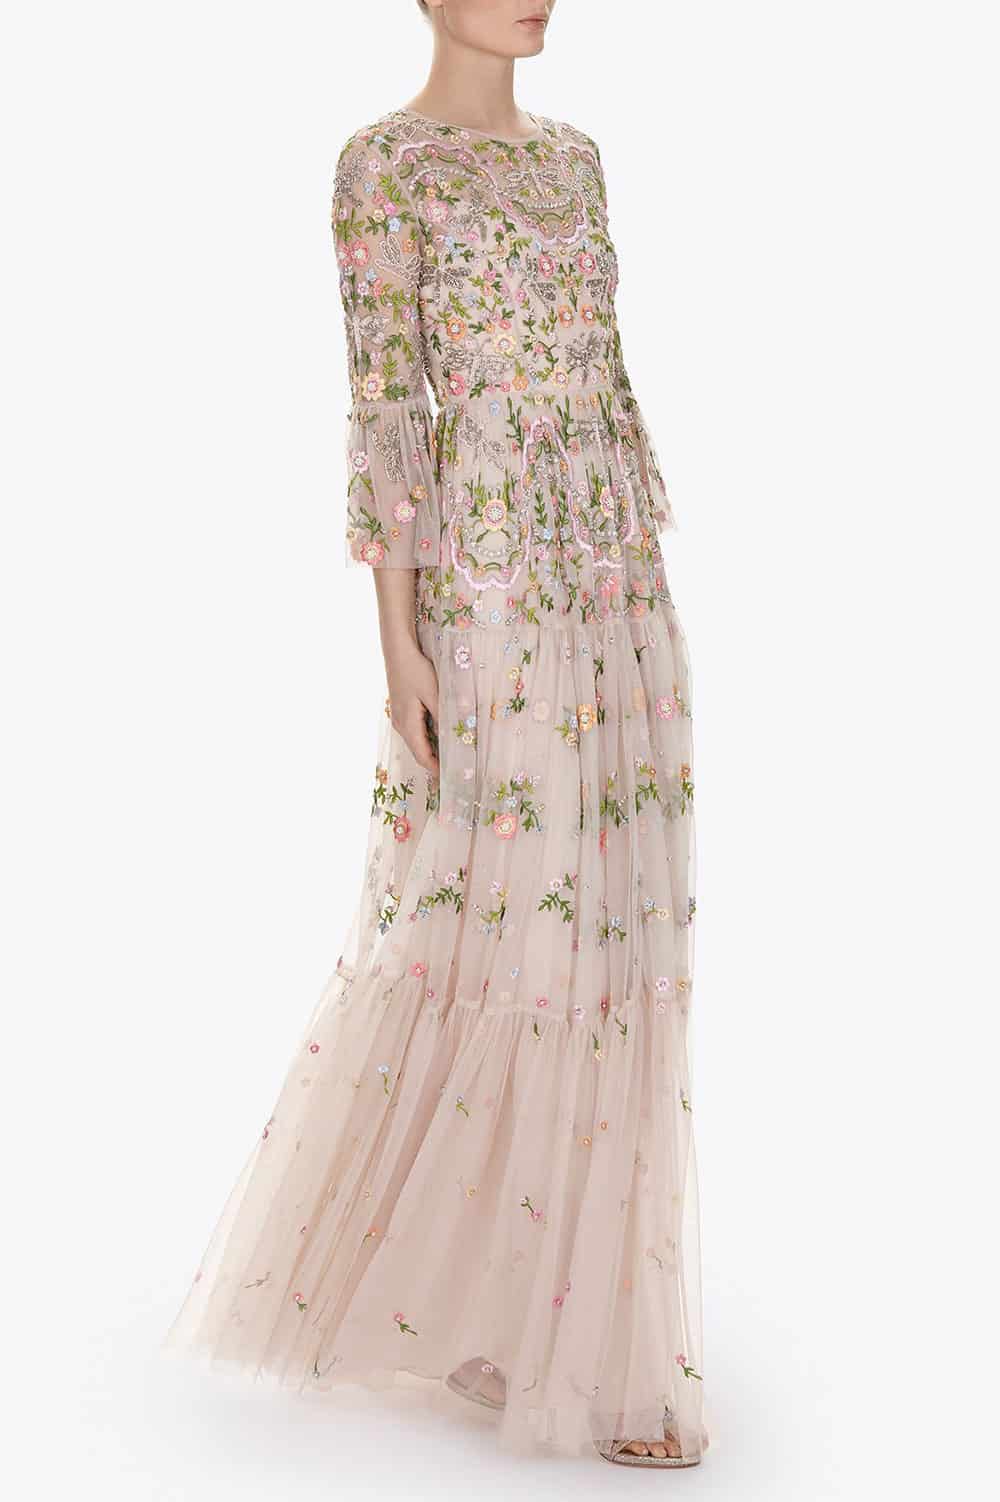 Whimsical and floaty,pastel-hued wedding gown from British designer Needle & Thread.